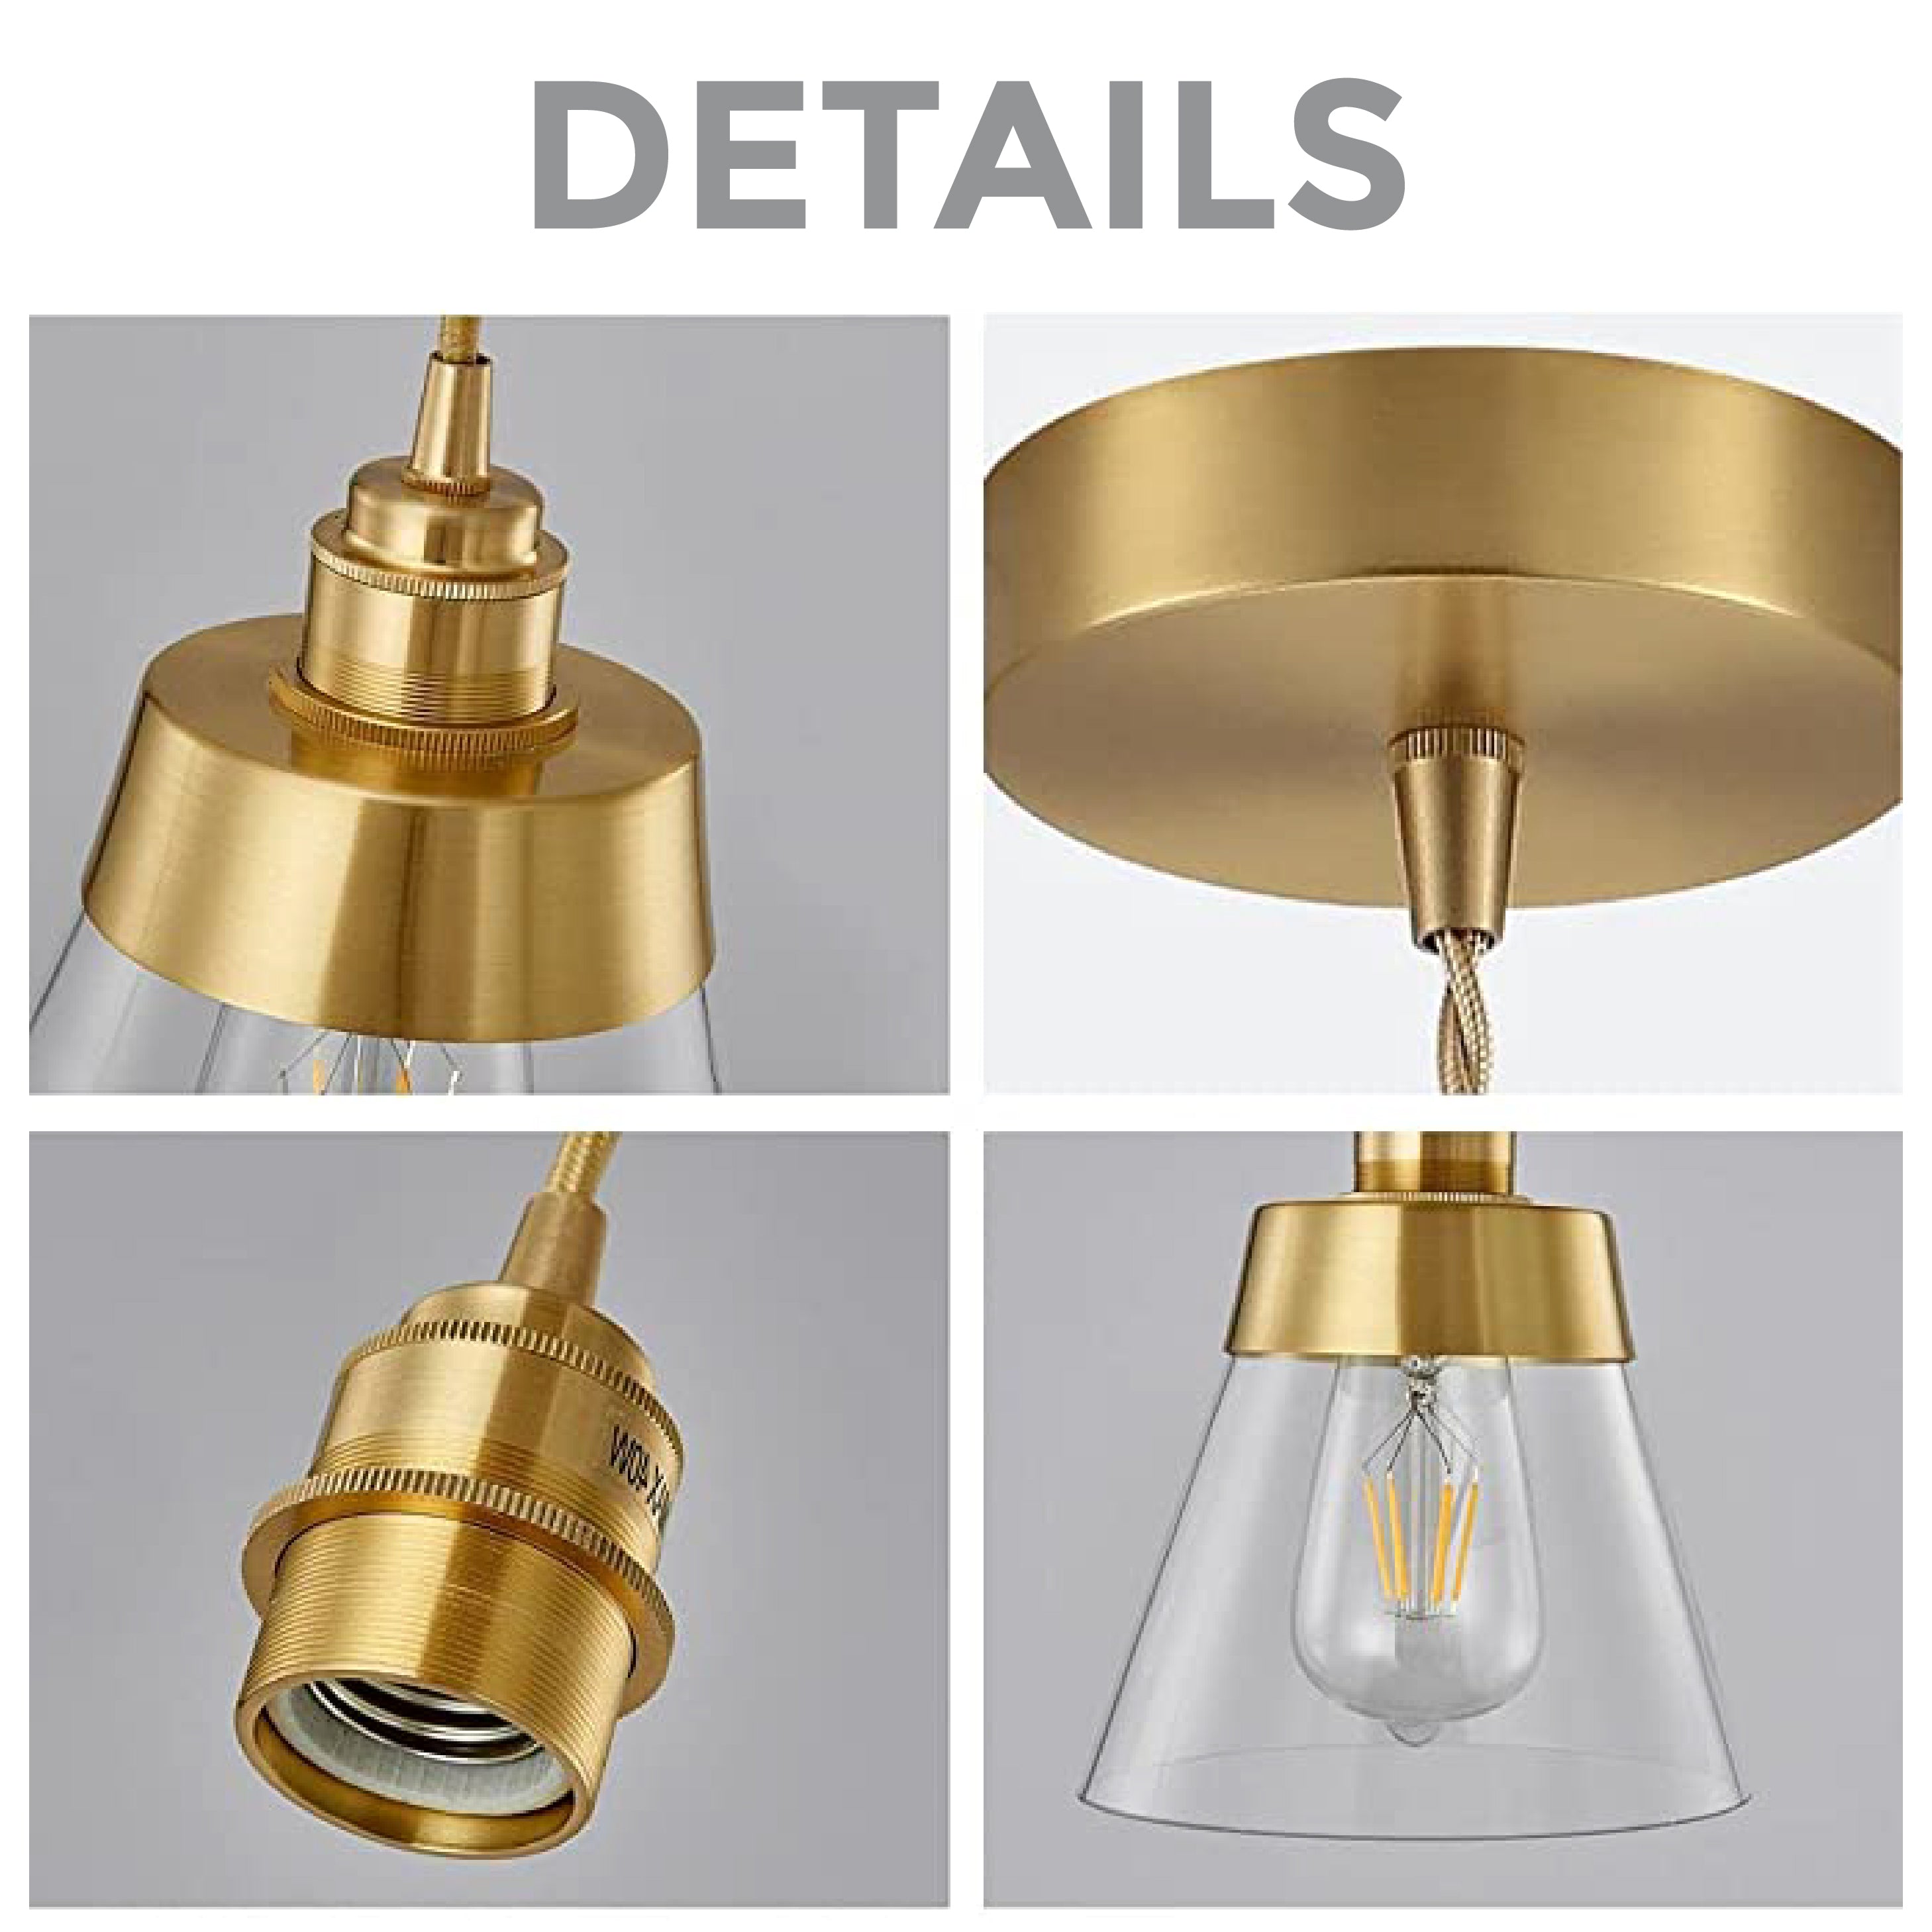 Gold and glass pendant light Adjustable Cord for Kitchen Island light Conical-Shaped Lamp